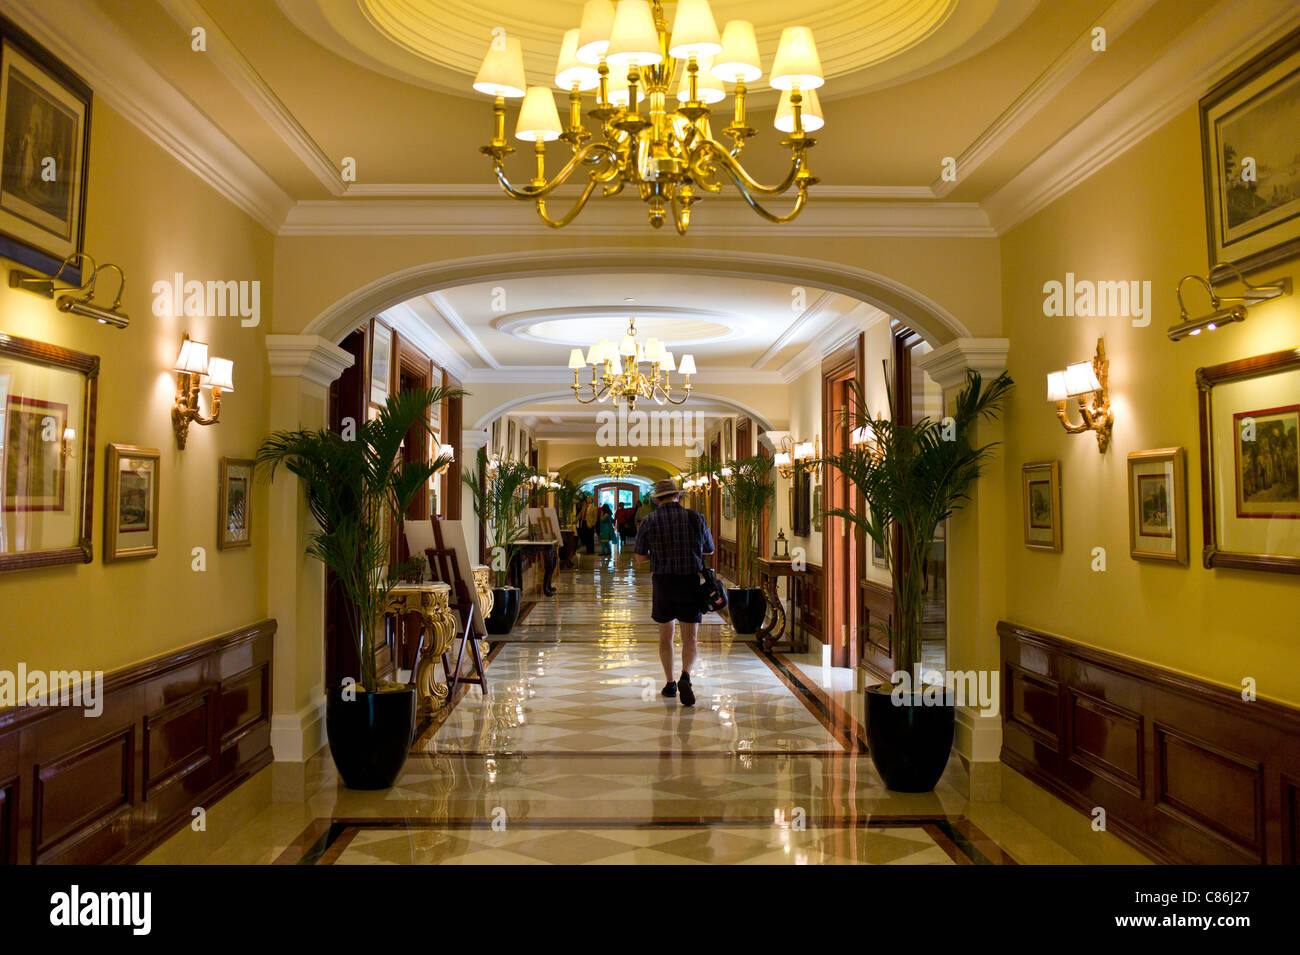 Interior of The Imperial Hotel with its luxury colonial elegance, New Delhi, India Stock Photo